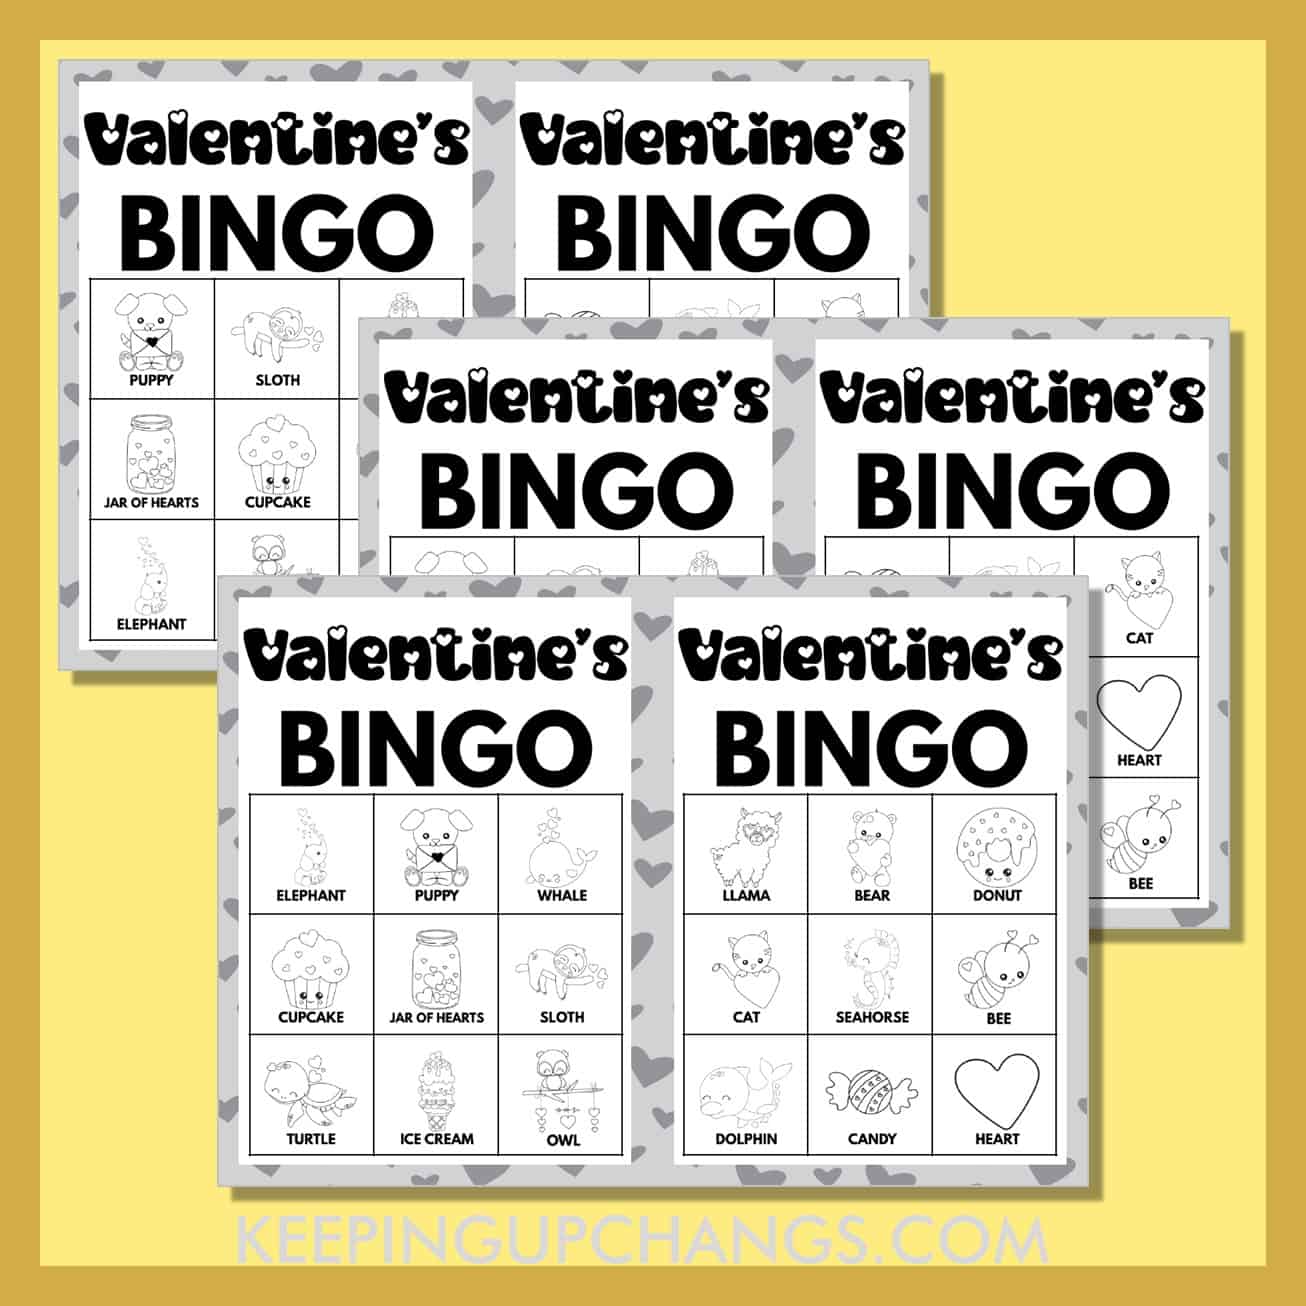 free valentine's bingo cards 3x3 black white coloring for party, school, group.